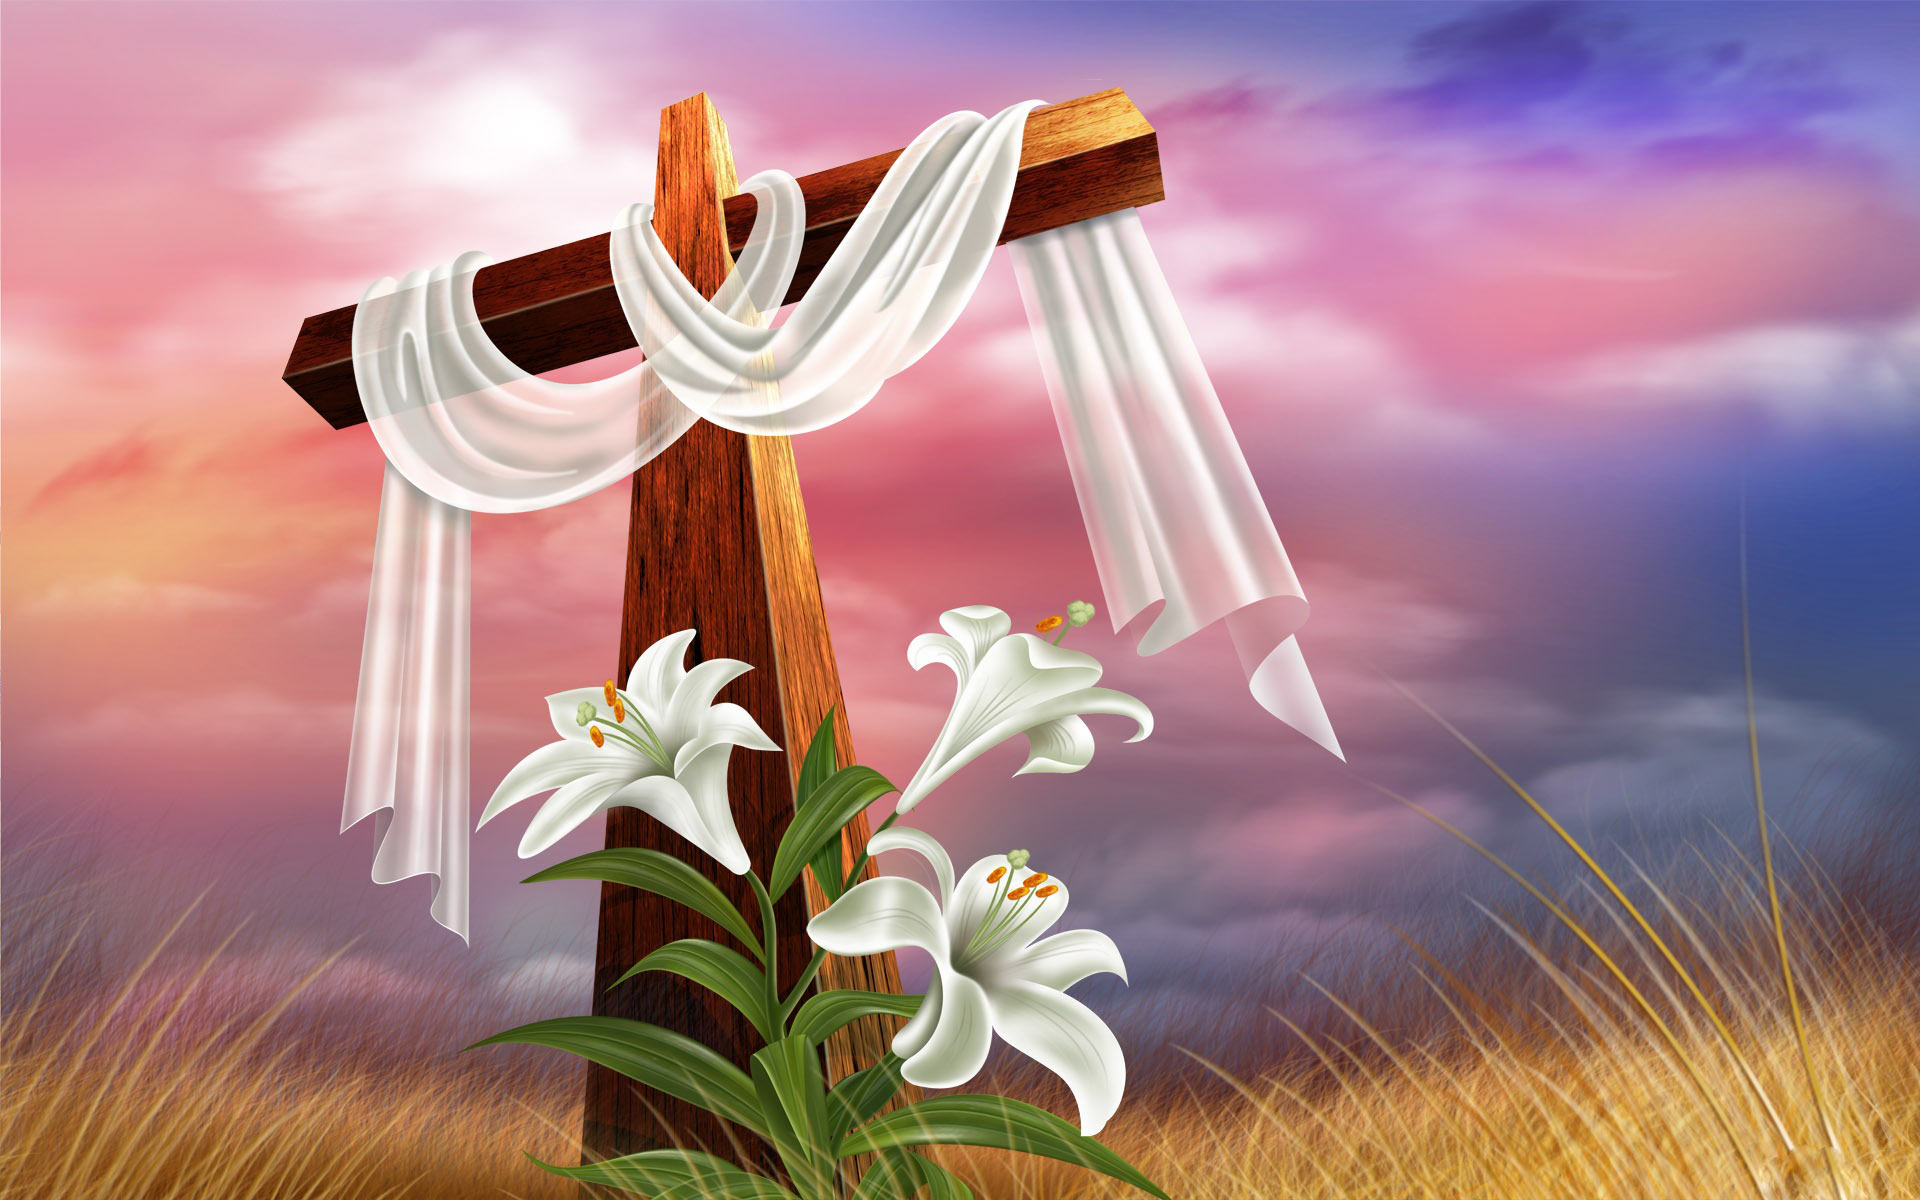 Is The Day That We Memorate Death Of Jesus Christ On Cross